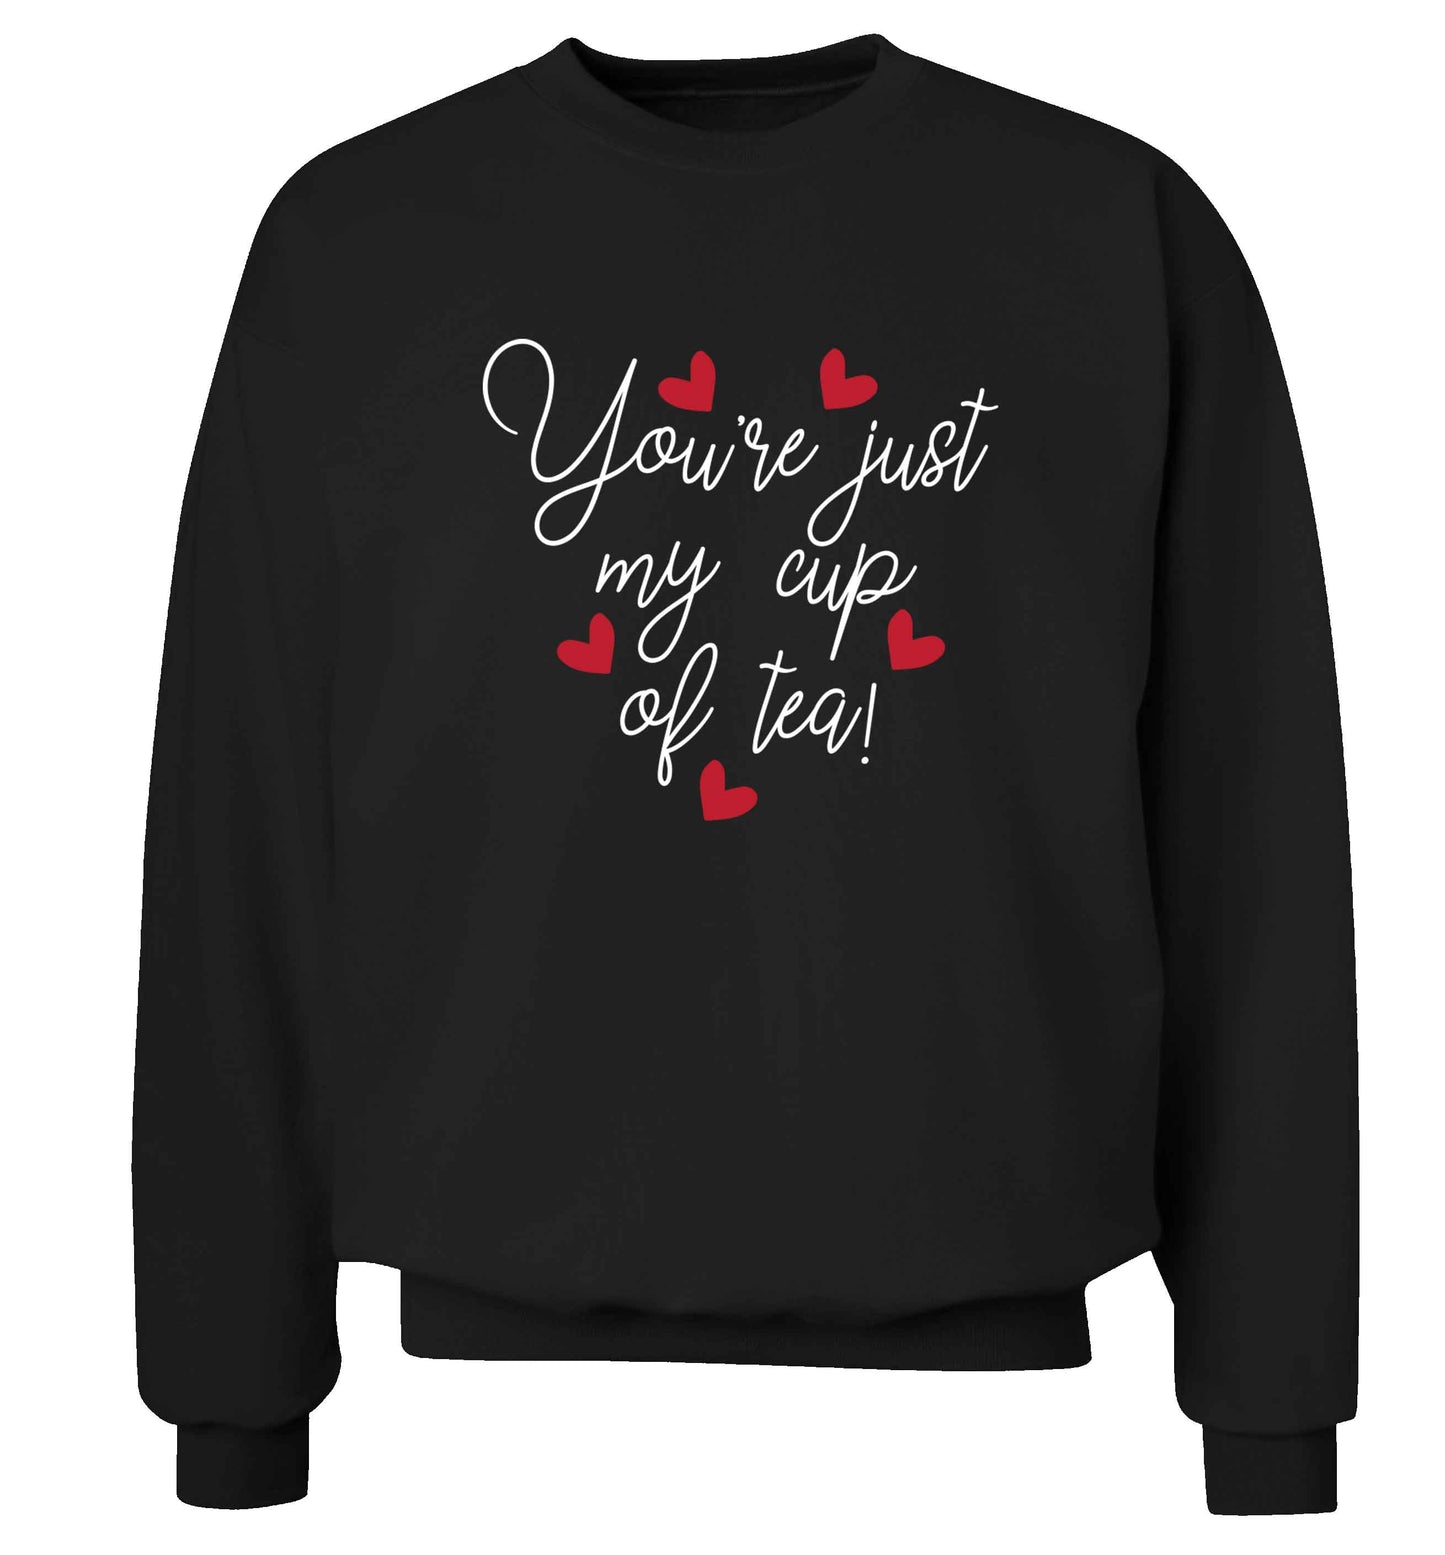 You're just my cup of tea adult's unisex black sweater 2XL